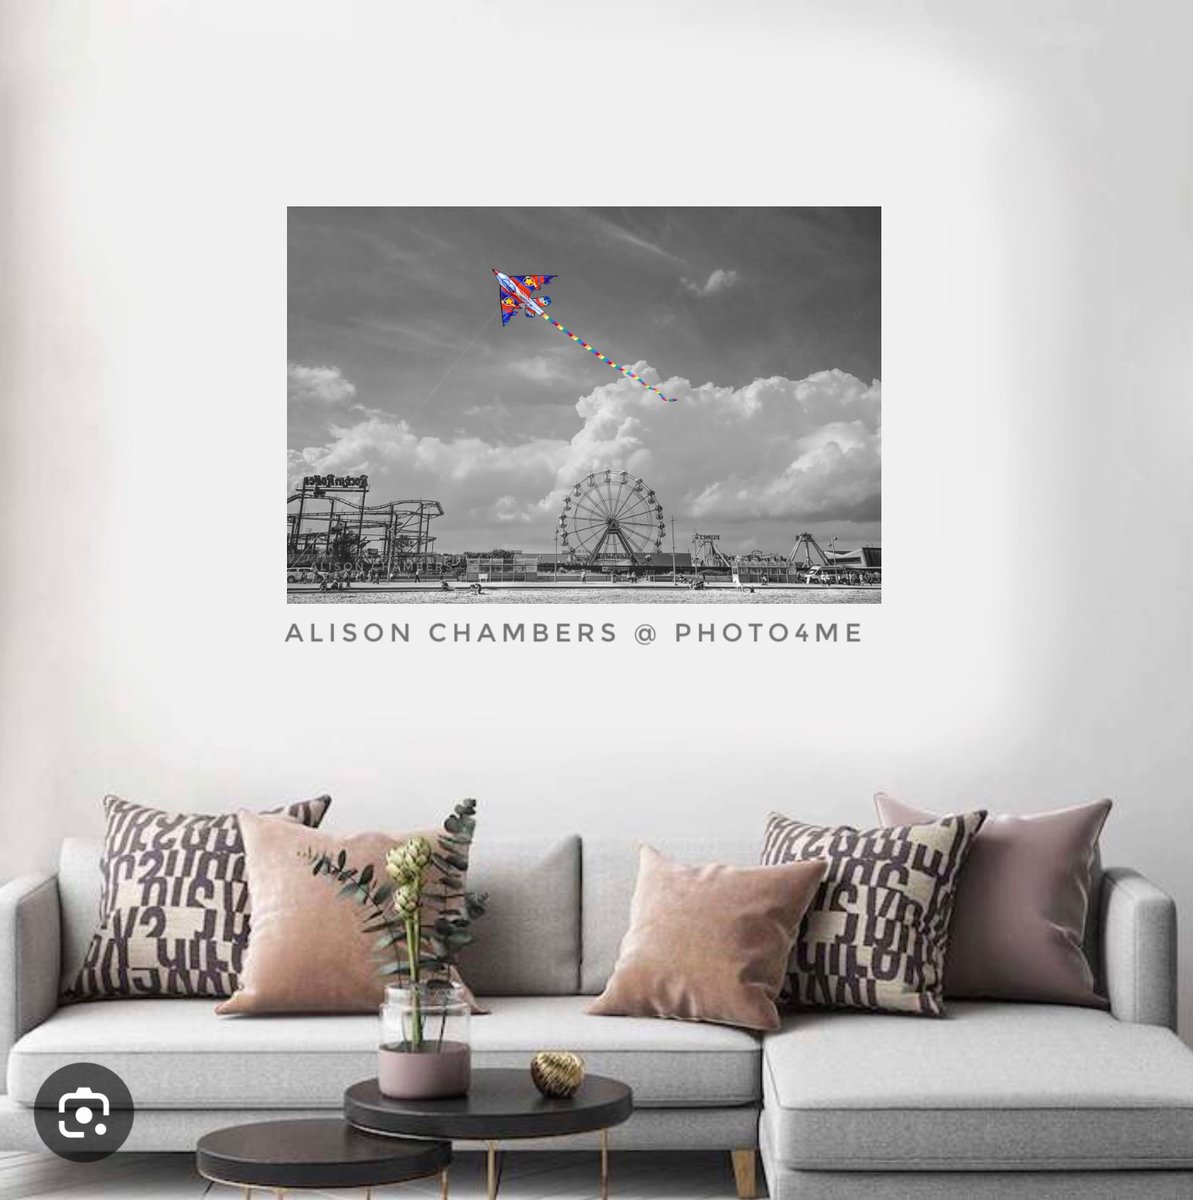 Skegness High Flying Kite©️. Available from; shop.photo4me.com/1300461 & alisonchambers2.redbubble.com & 2-alison-chambers.pixels.com #skegness #skegness_official #skegnessbeach #Skegee #skeg #lincolnshirecoast